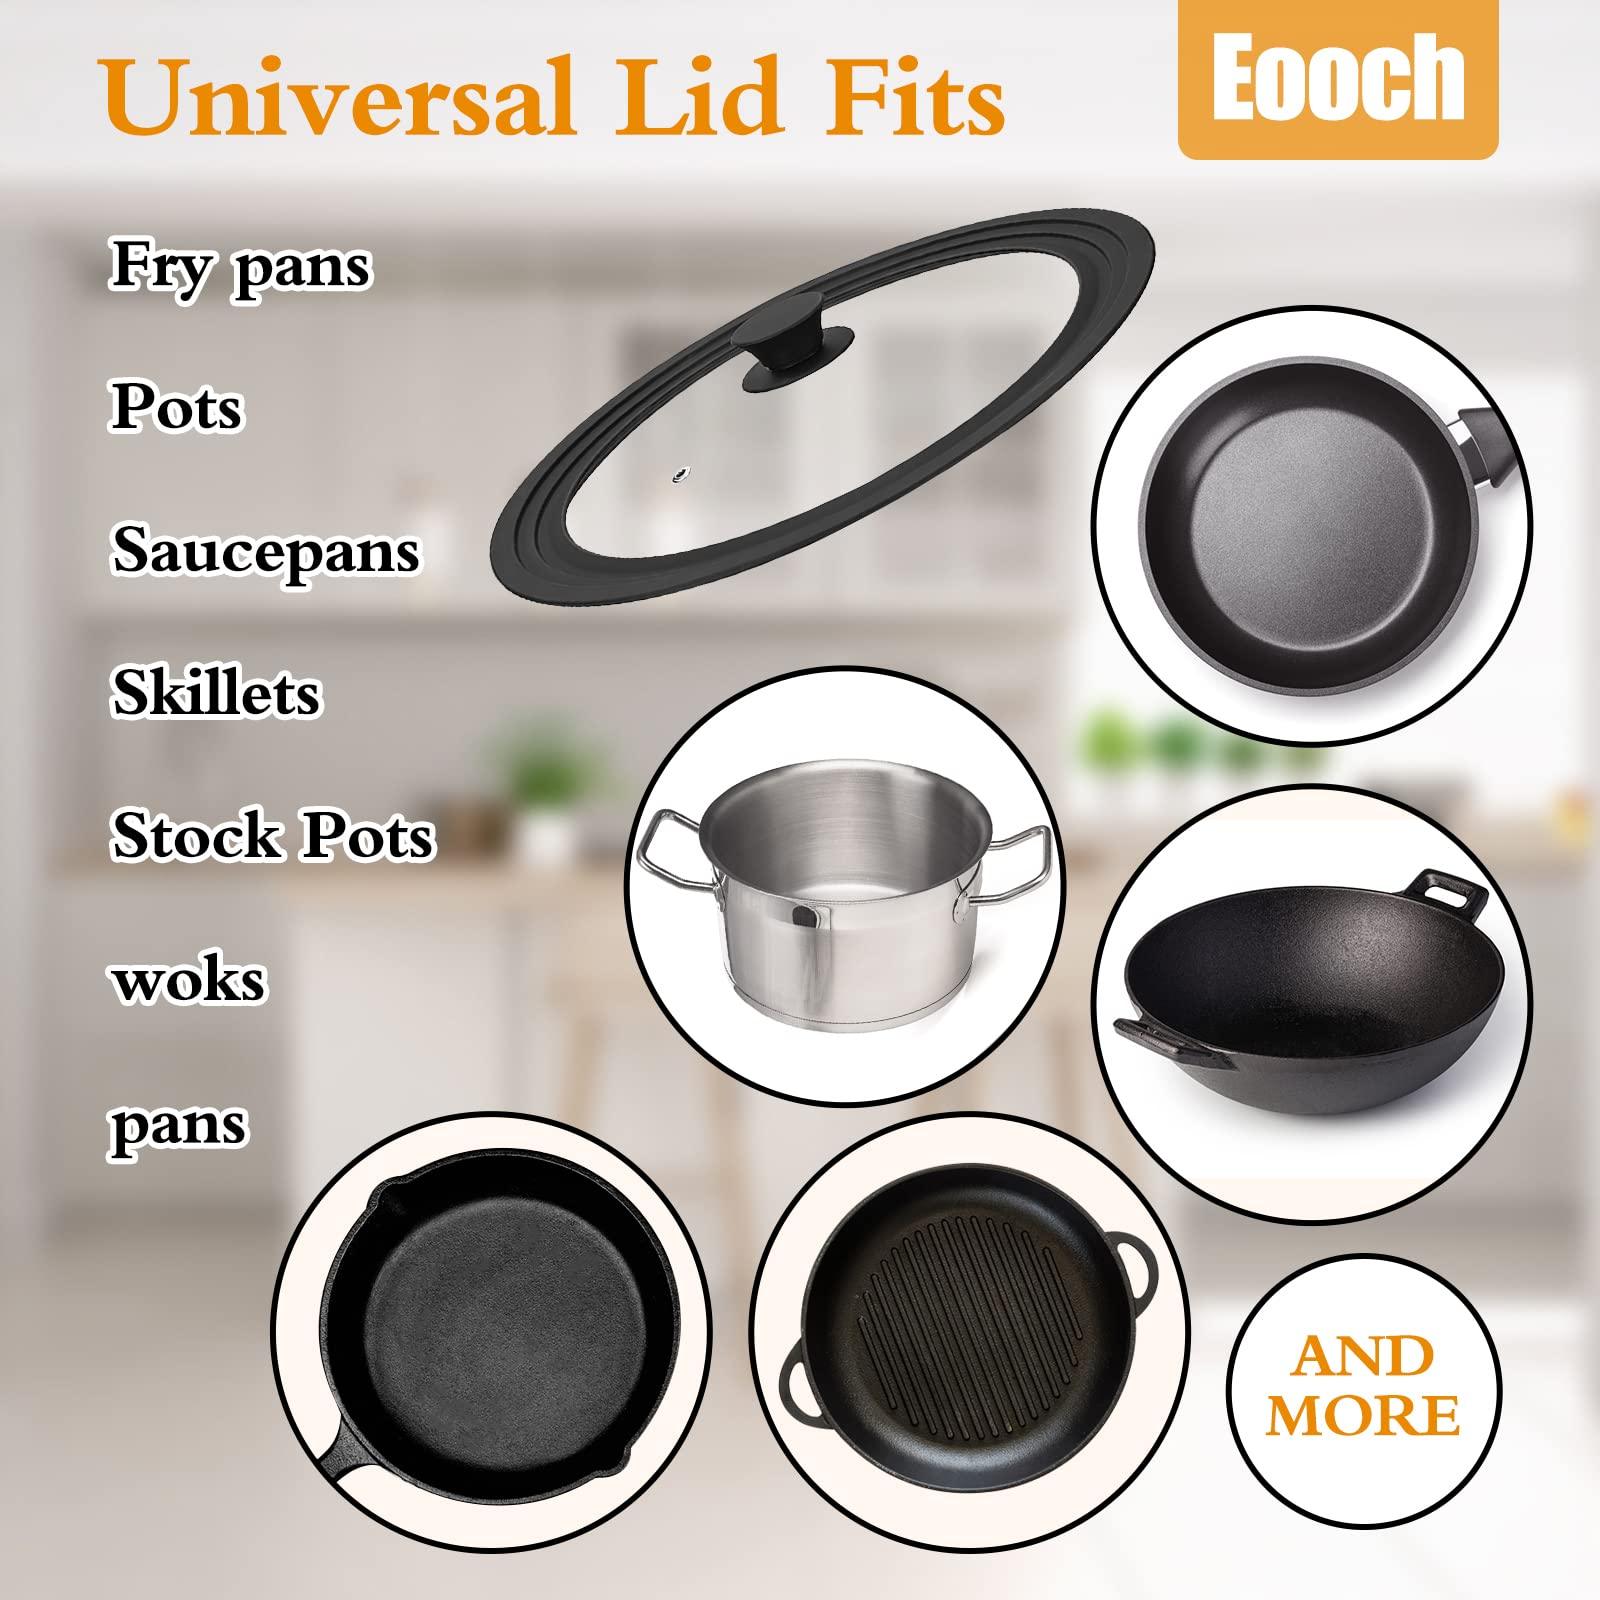 Universal Lid for Pots, Pans and Skillets Vented Tempered Glass with Heat Resistant Silicone Rim, Fits 6 inch, 7 inch, 8 inch Cookware, Replacement Lid, Black - CookCave